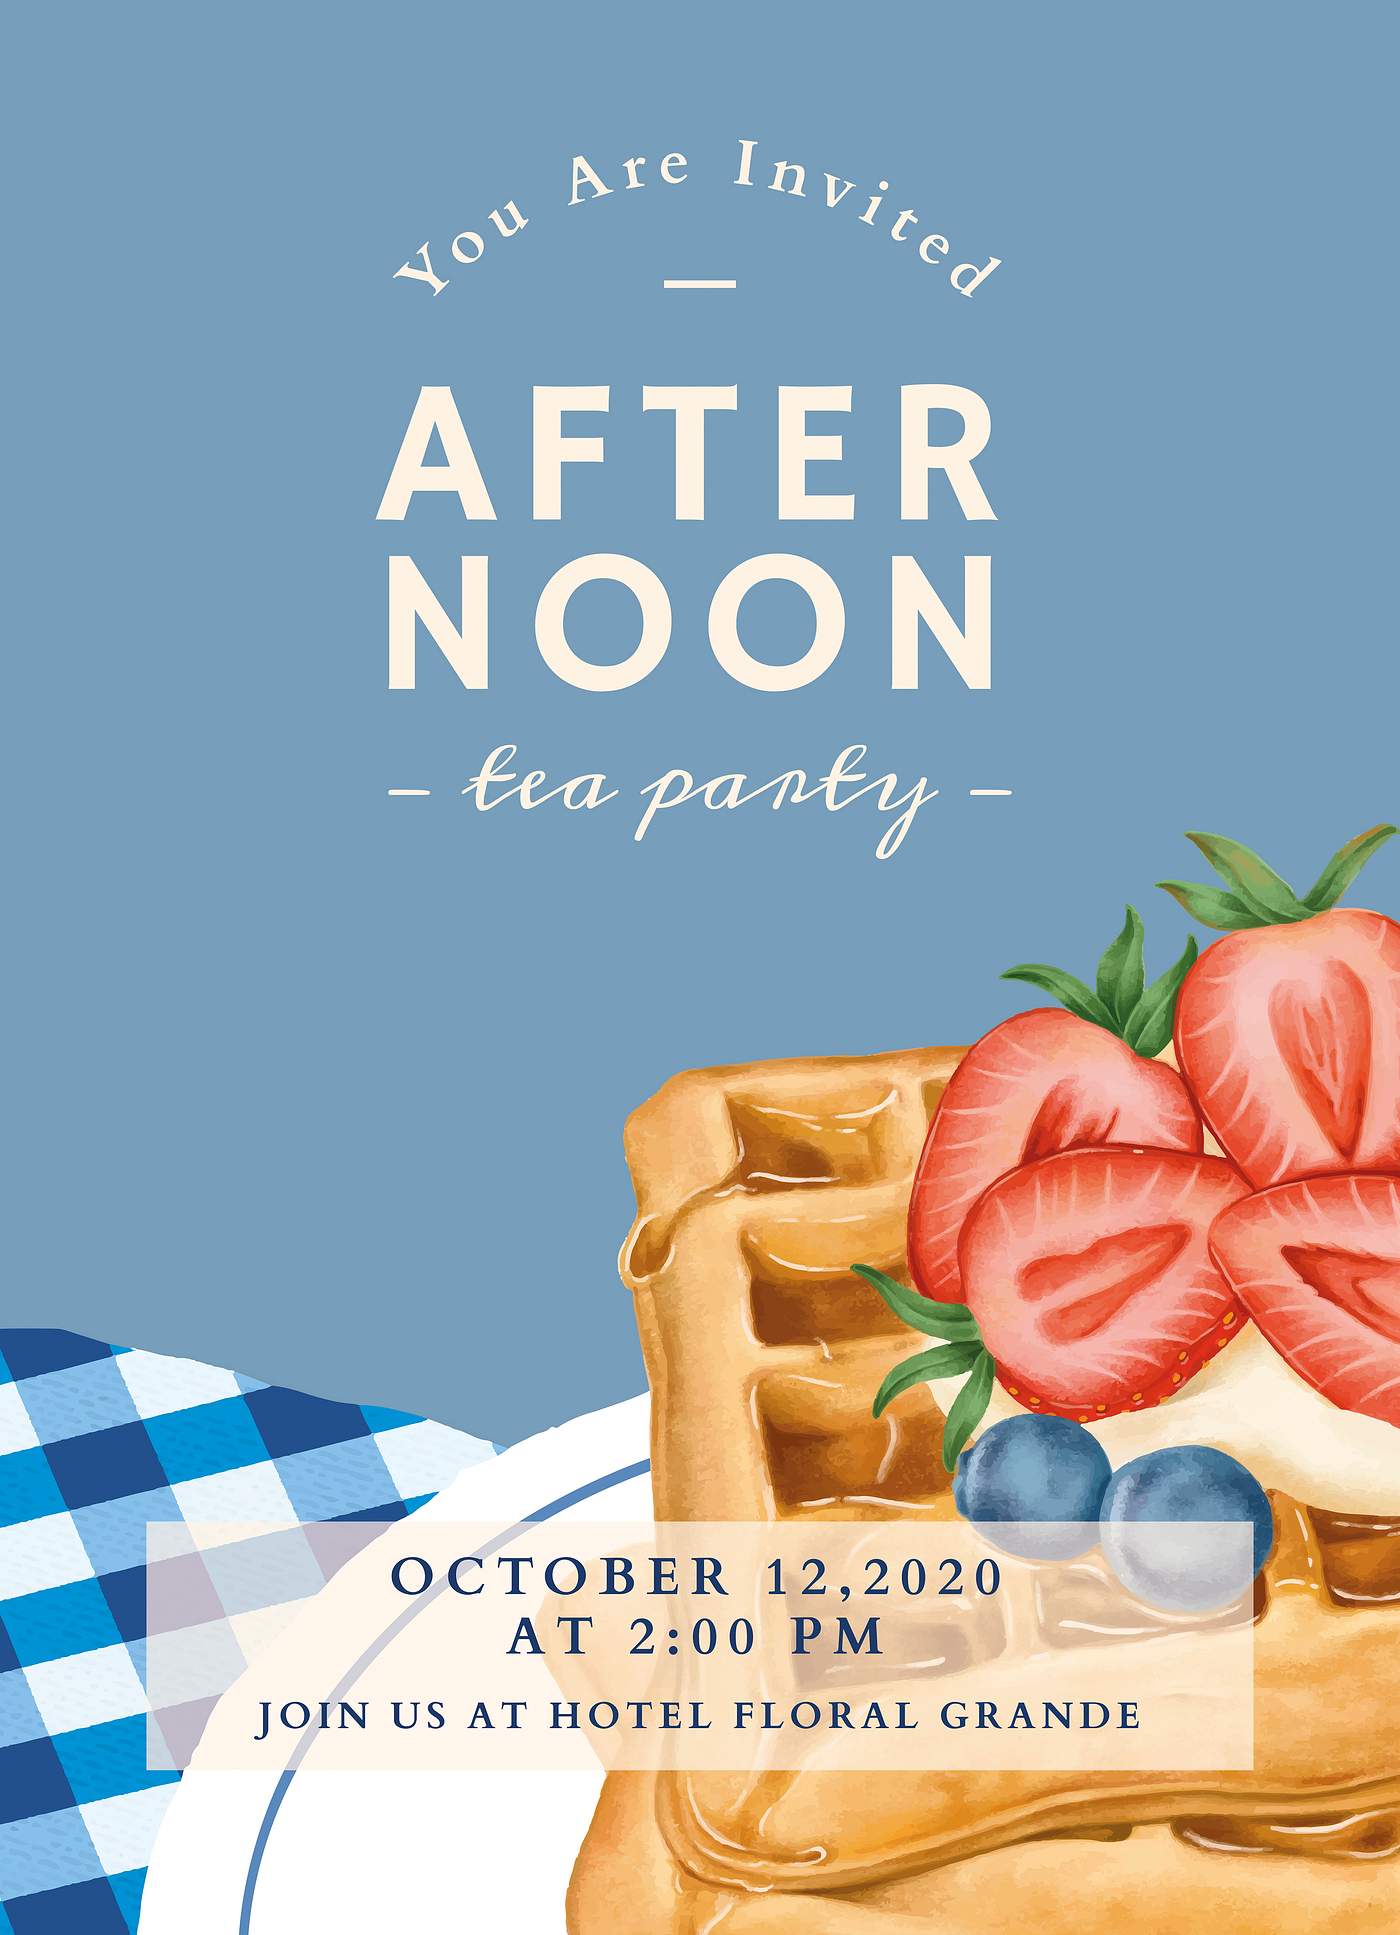 Afternoon tea party invitation card template | Free vector - 2229989